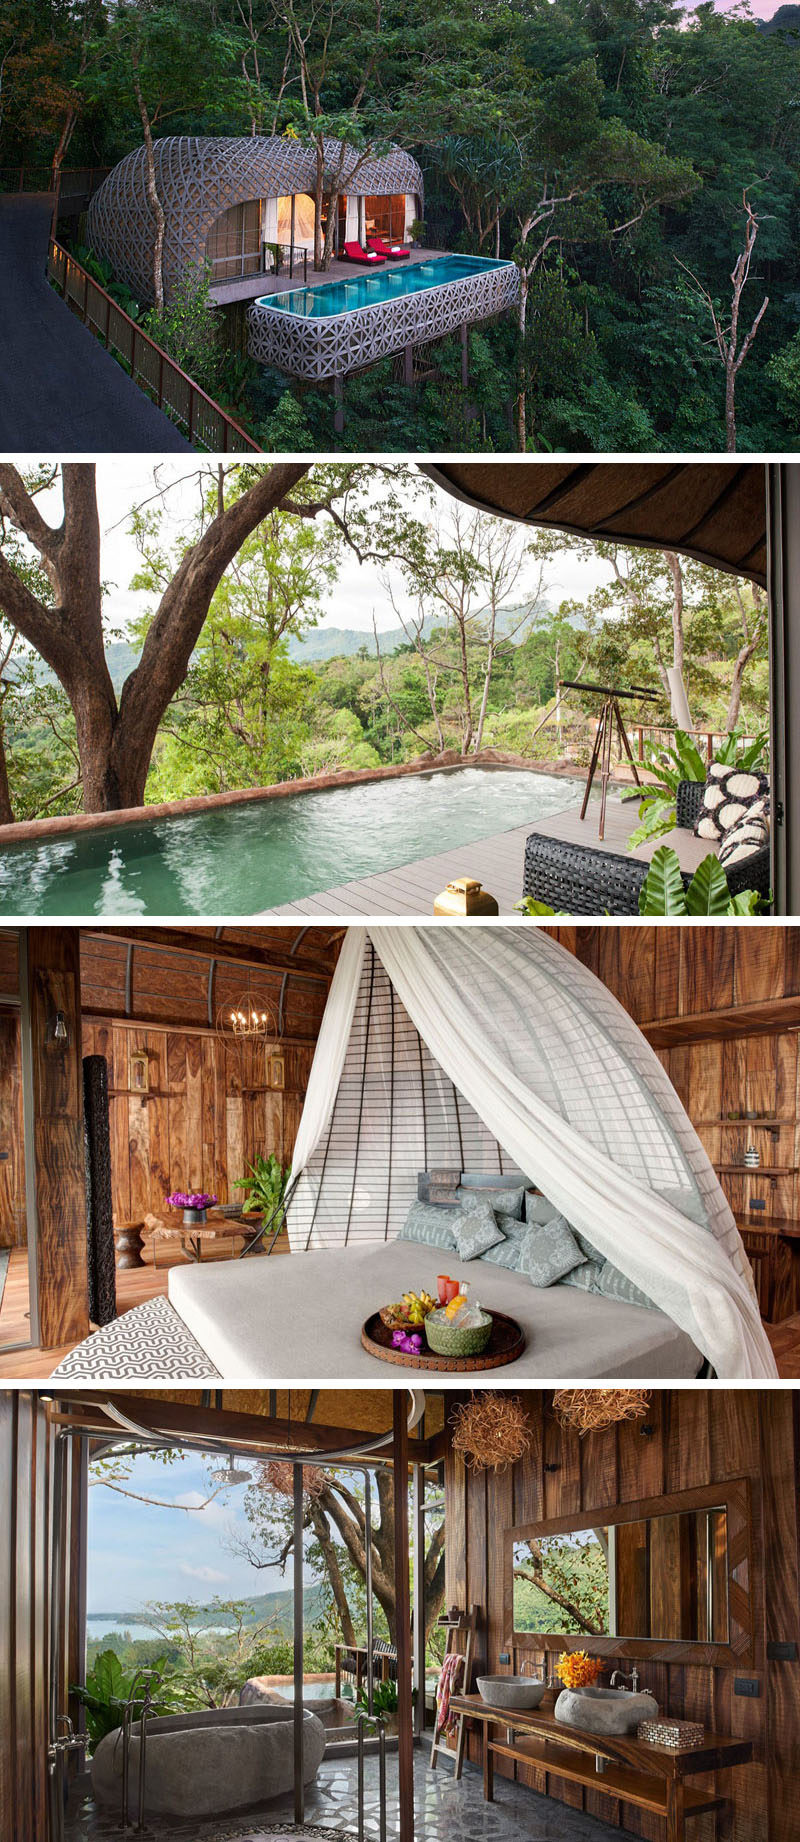 Travel Idea - At the Keemala resort in Thailand and situated up in the trees, criss-crossing strips cover the outside of this villa to create an exterior that resembles a birds nest.